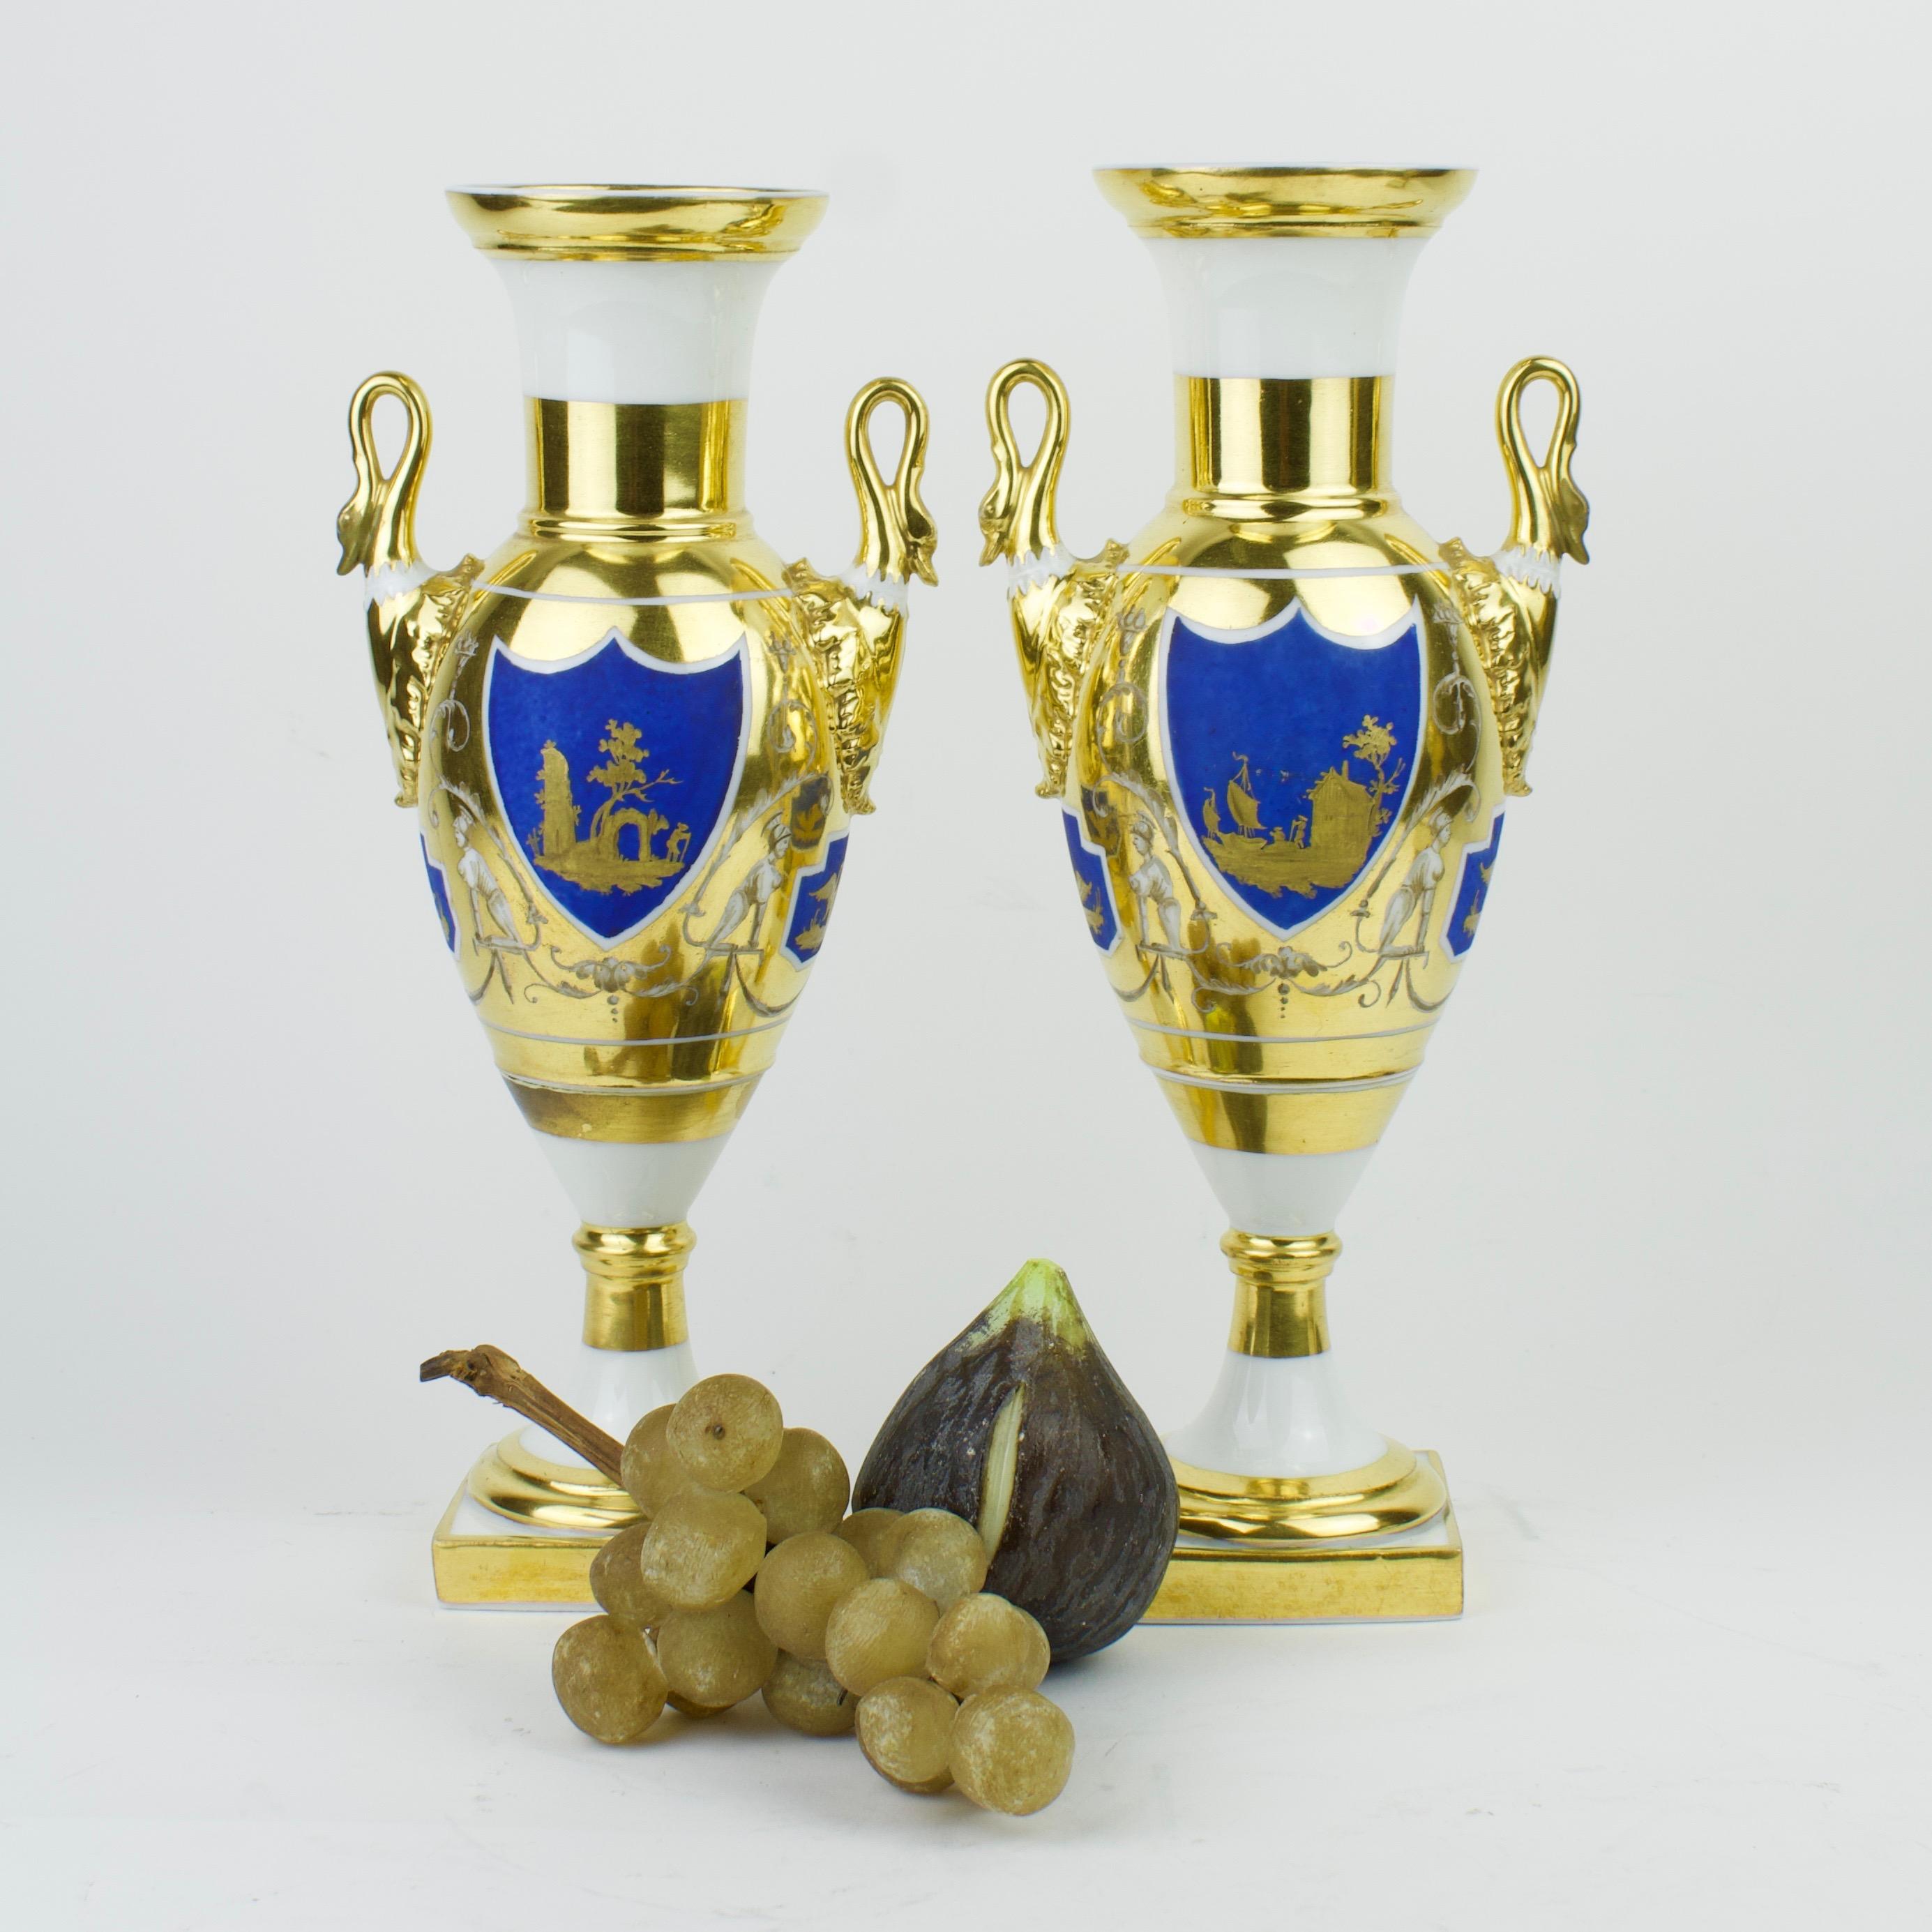 Pair of Early 19th Century French/Paris Gilt and Painted Porcelain Amphora Vases 7